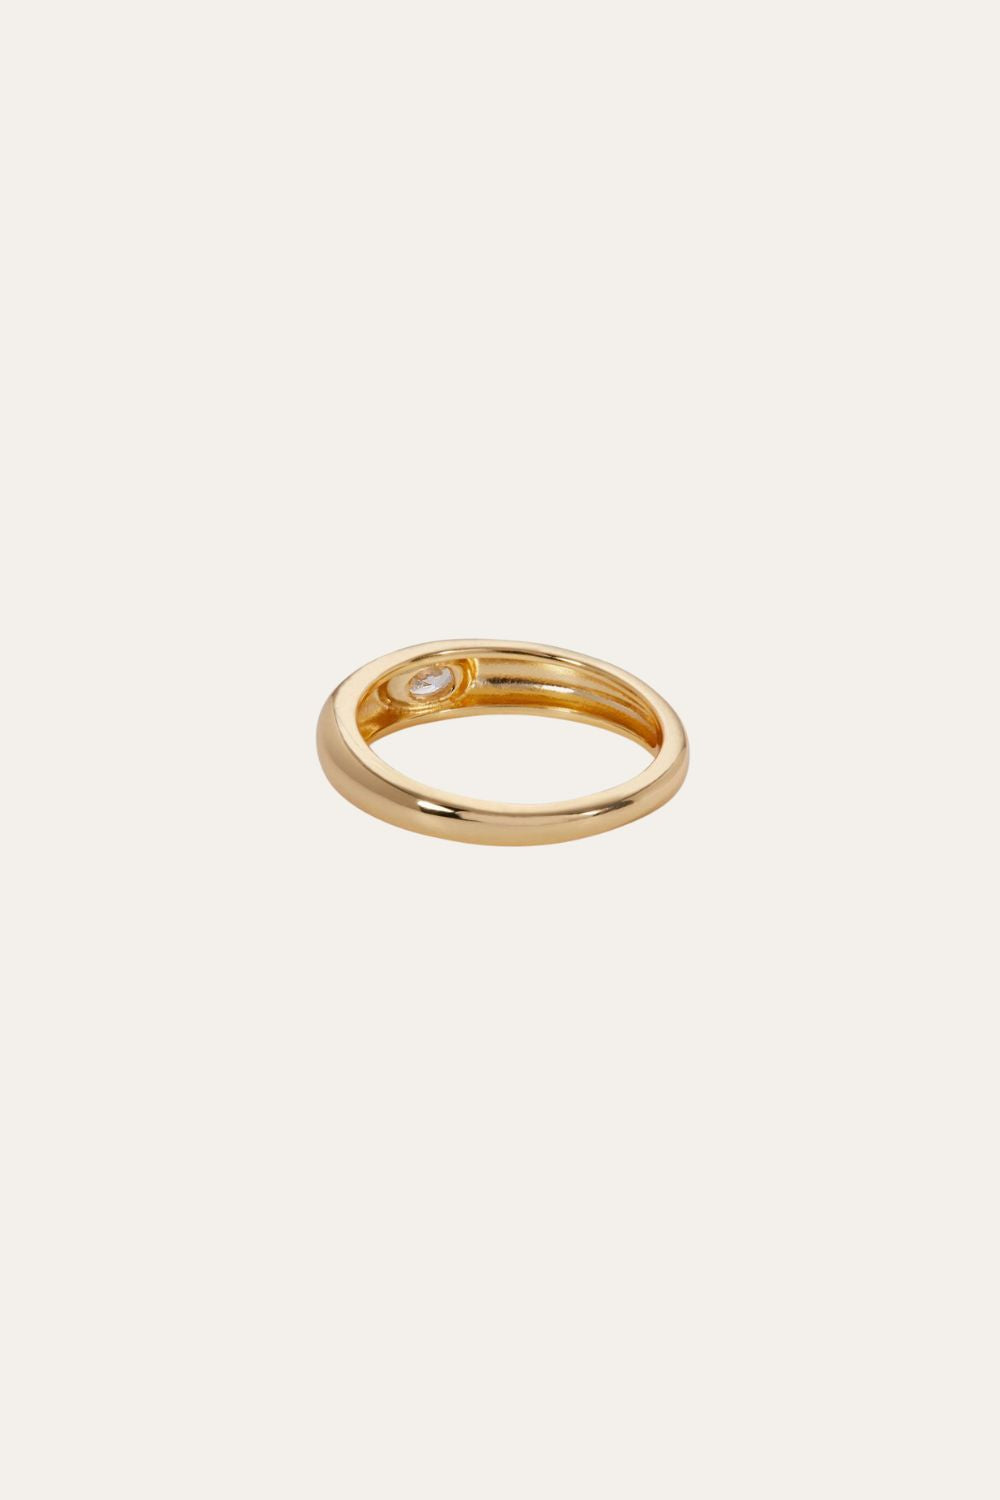 Lara band with white stone gold vermeil ring